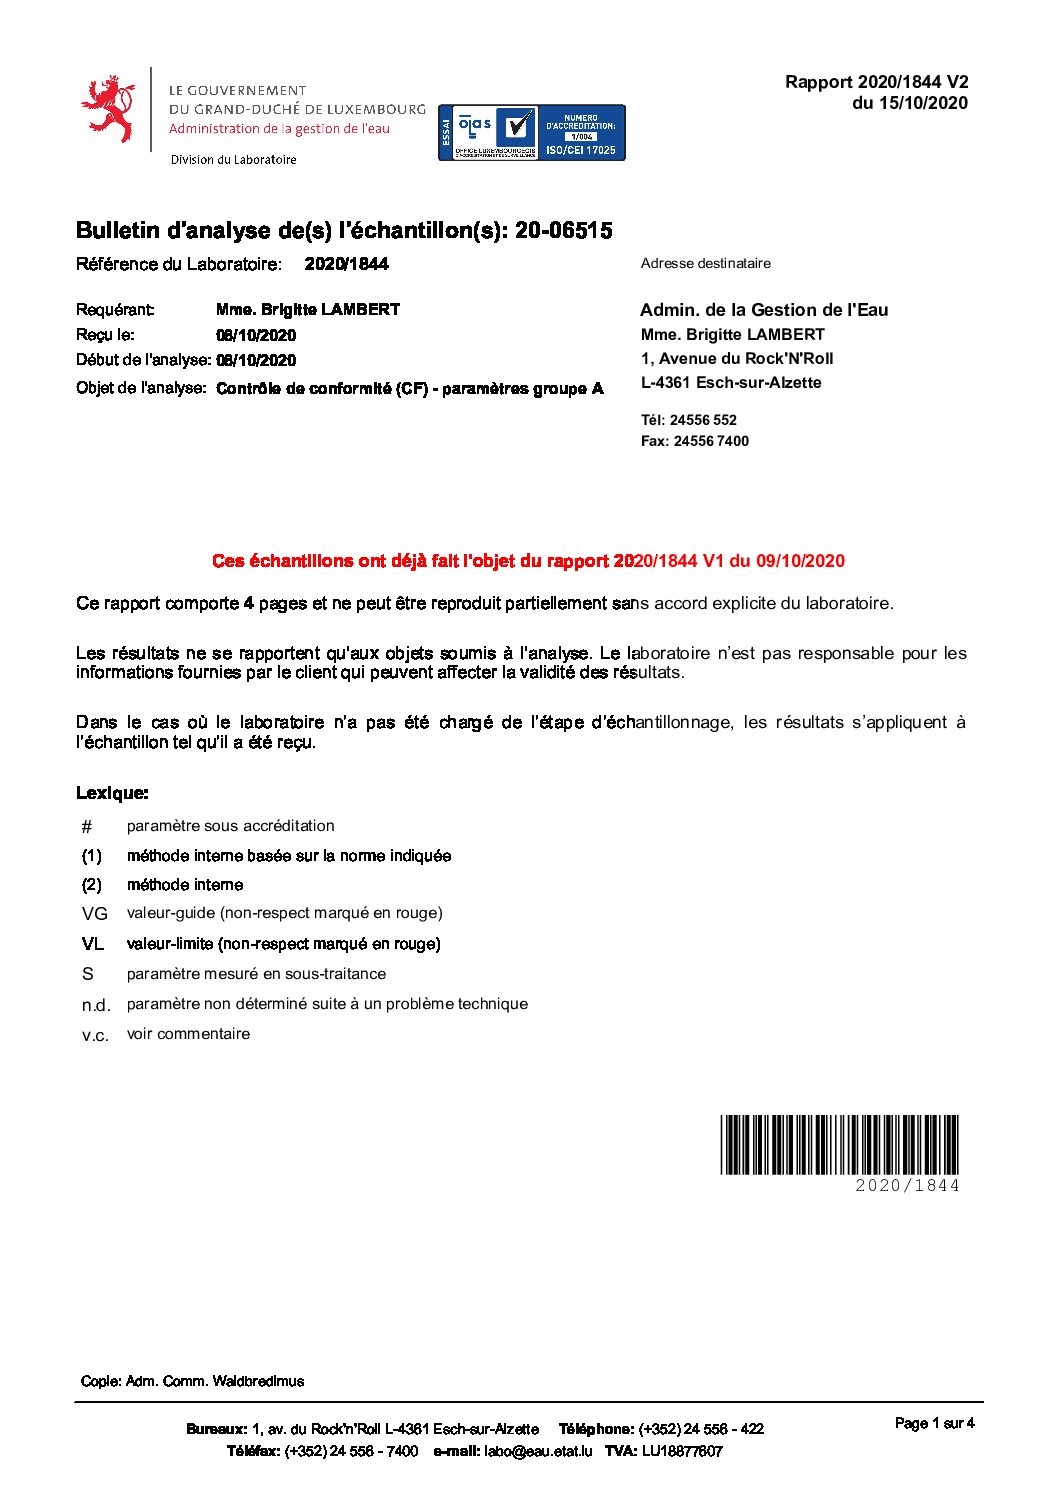 Rapport AGE 08.10.2020